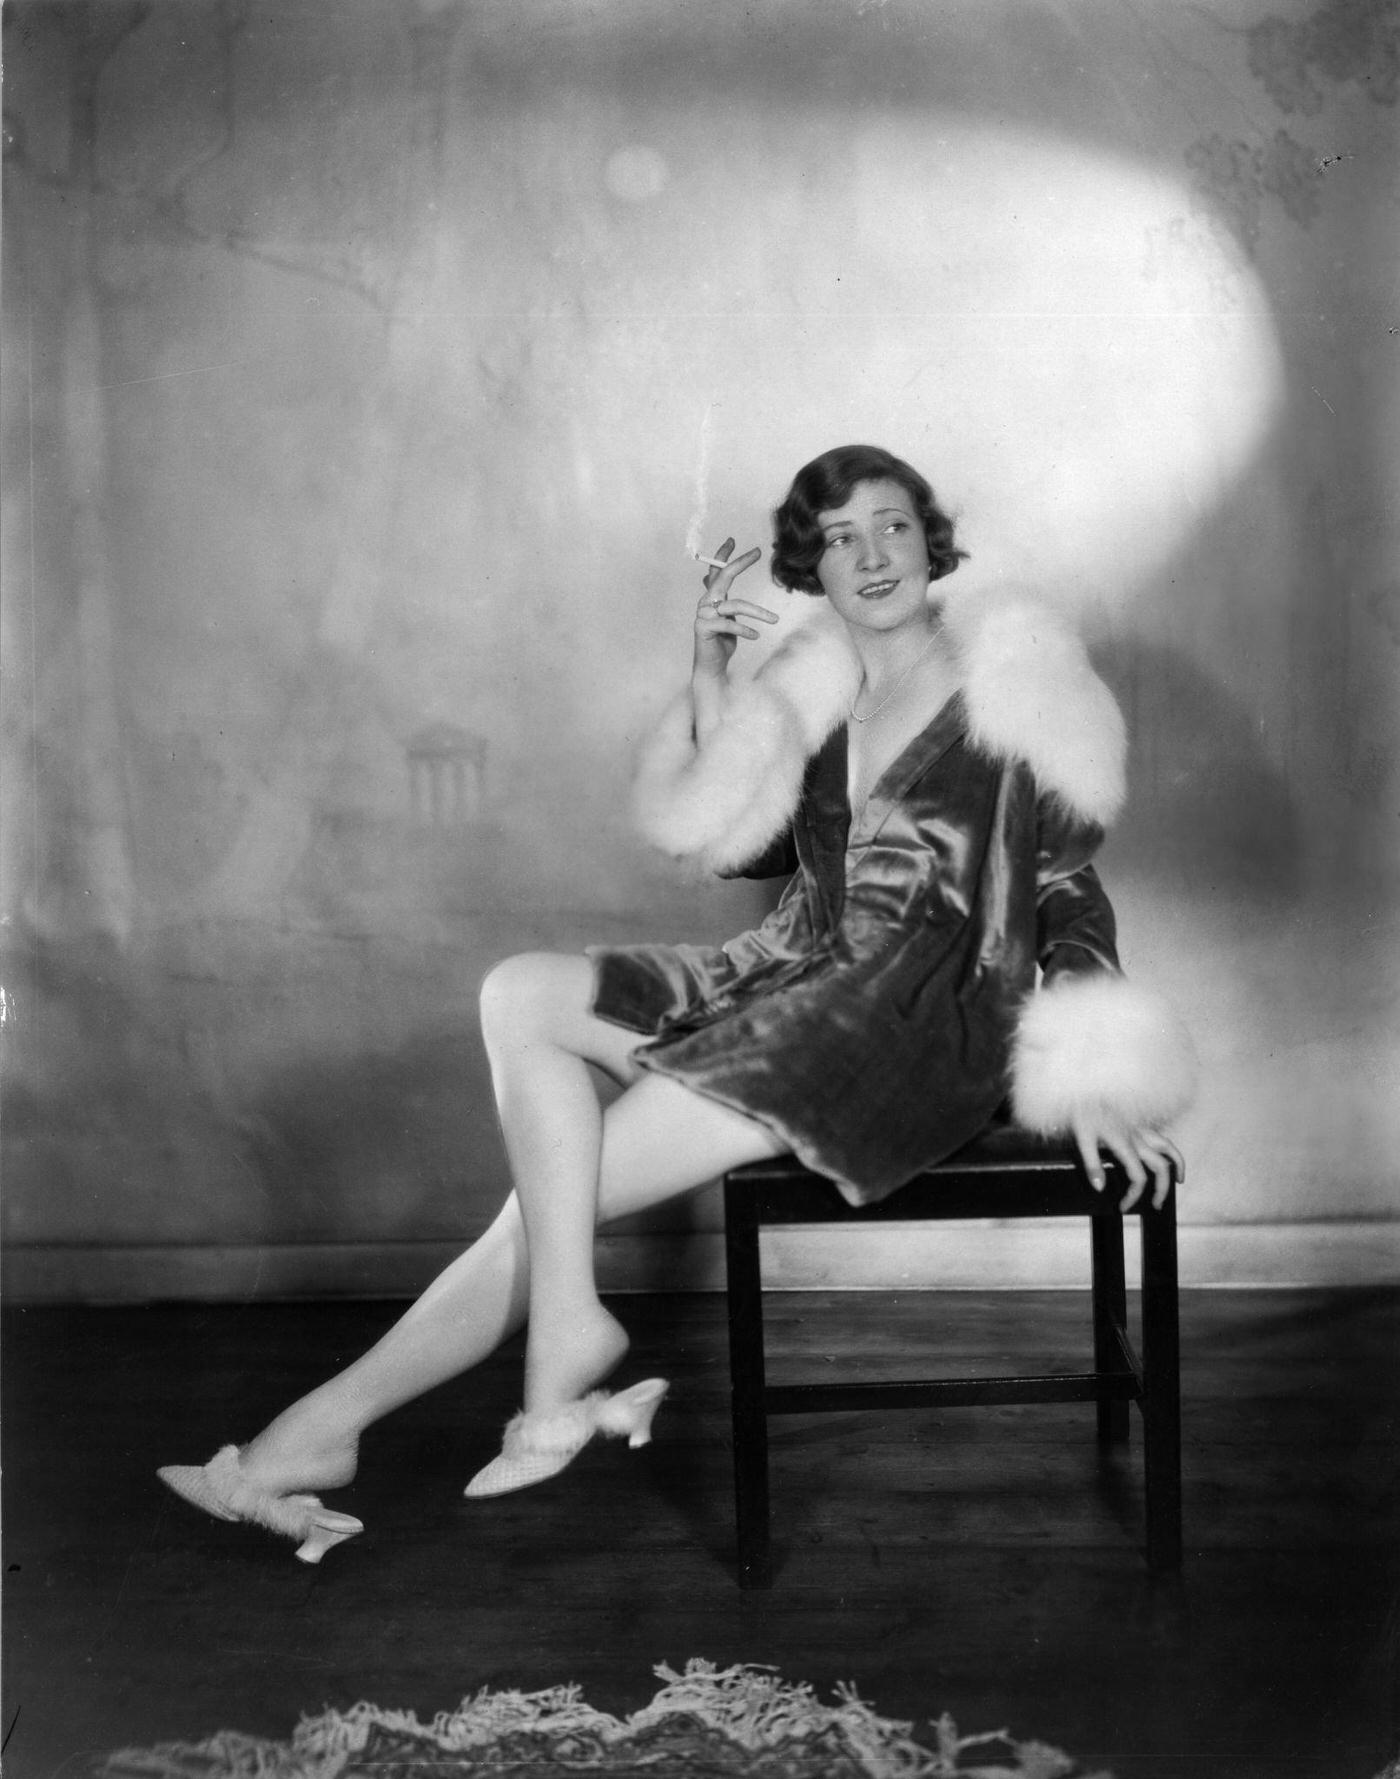 Margaret Campbell in Fur-Trimmed Outfit, 1928: Exuding Glamour with a Cigarette